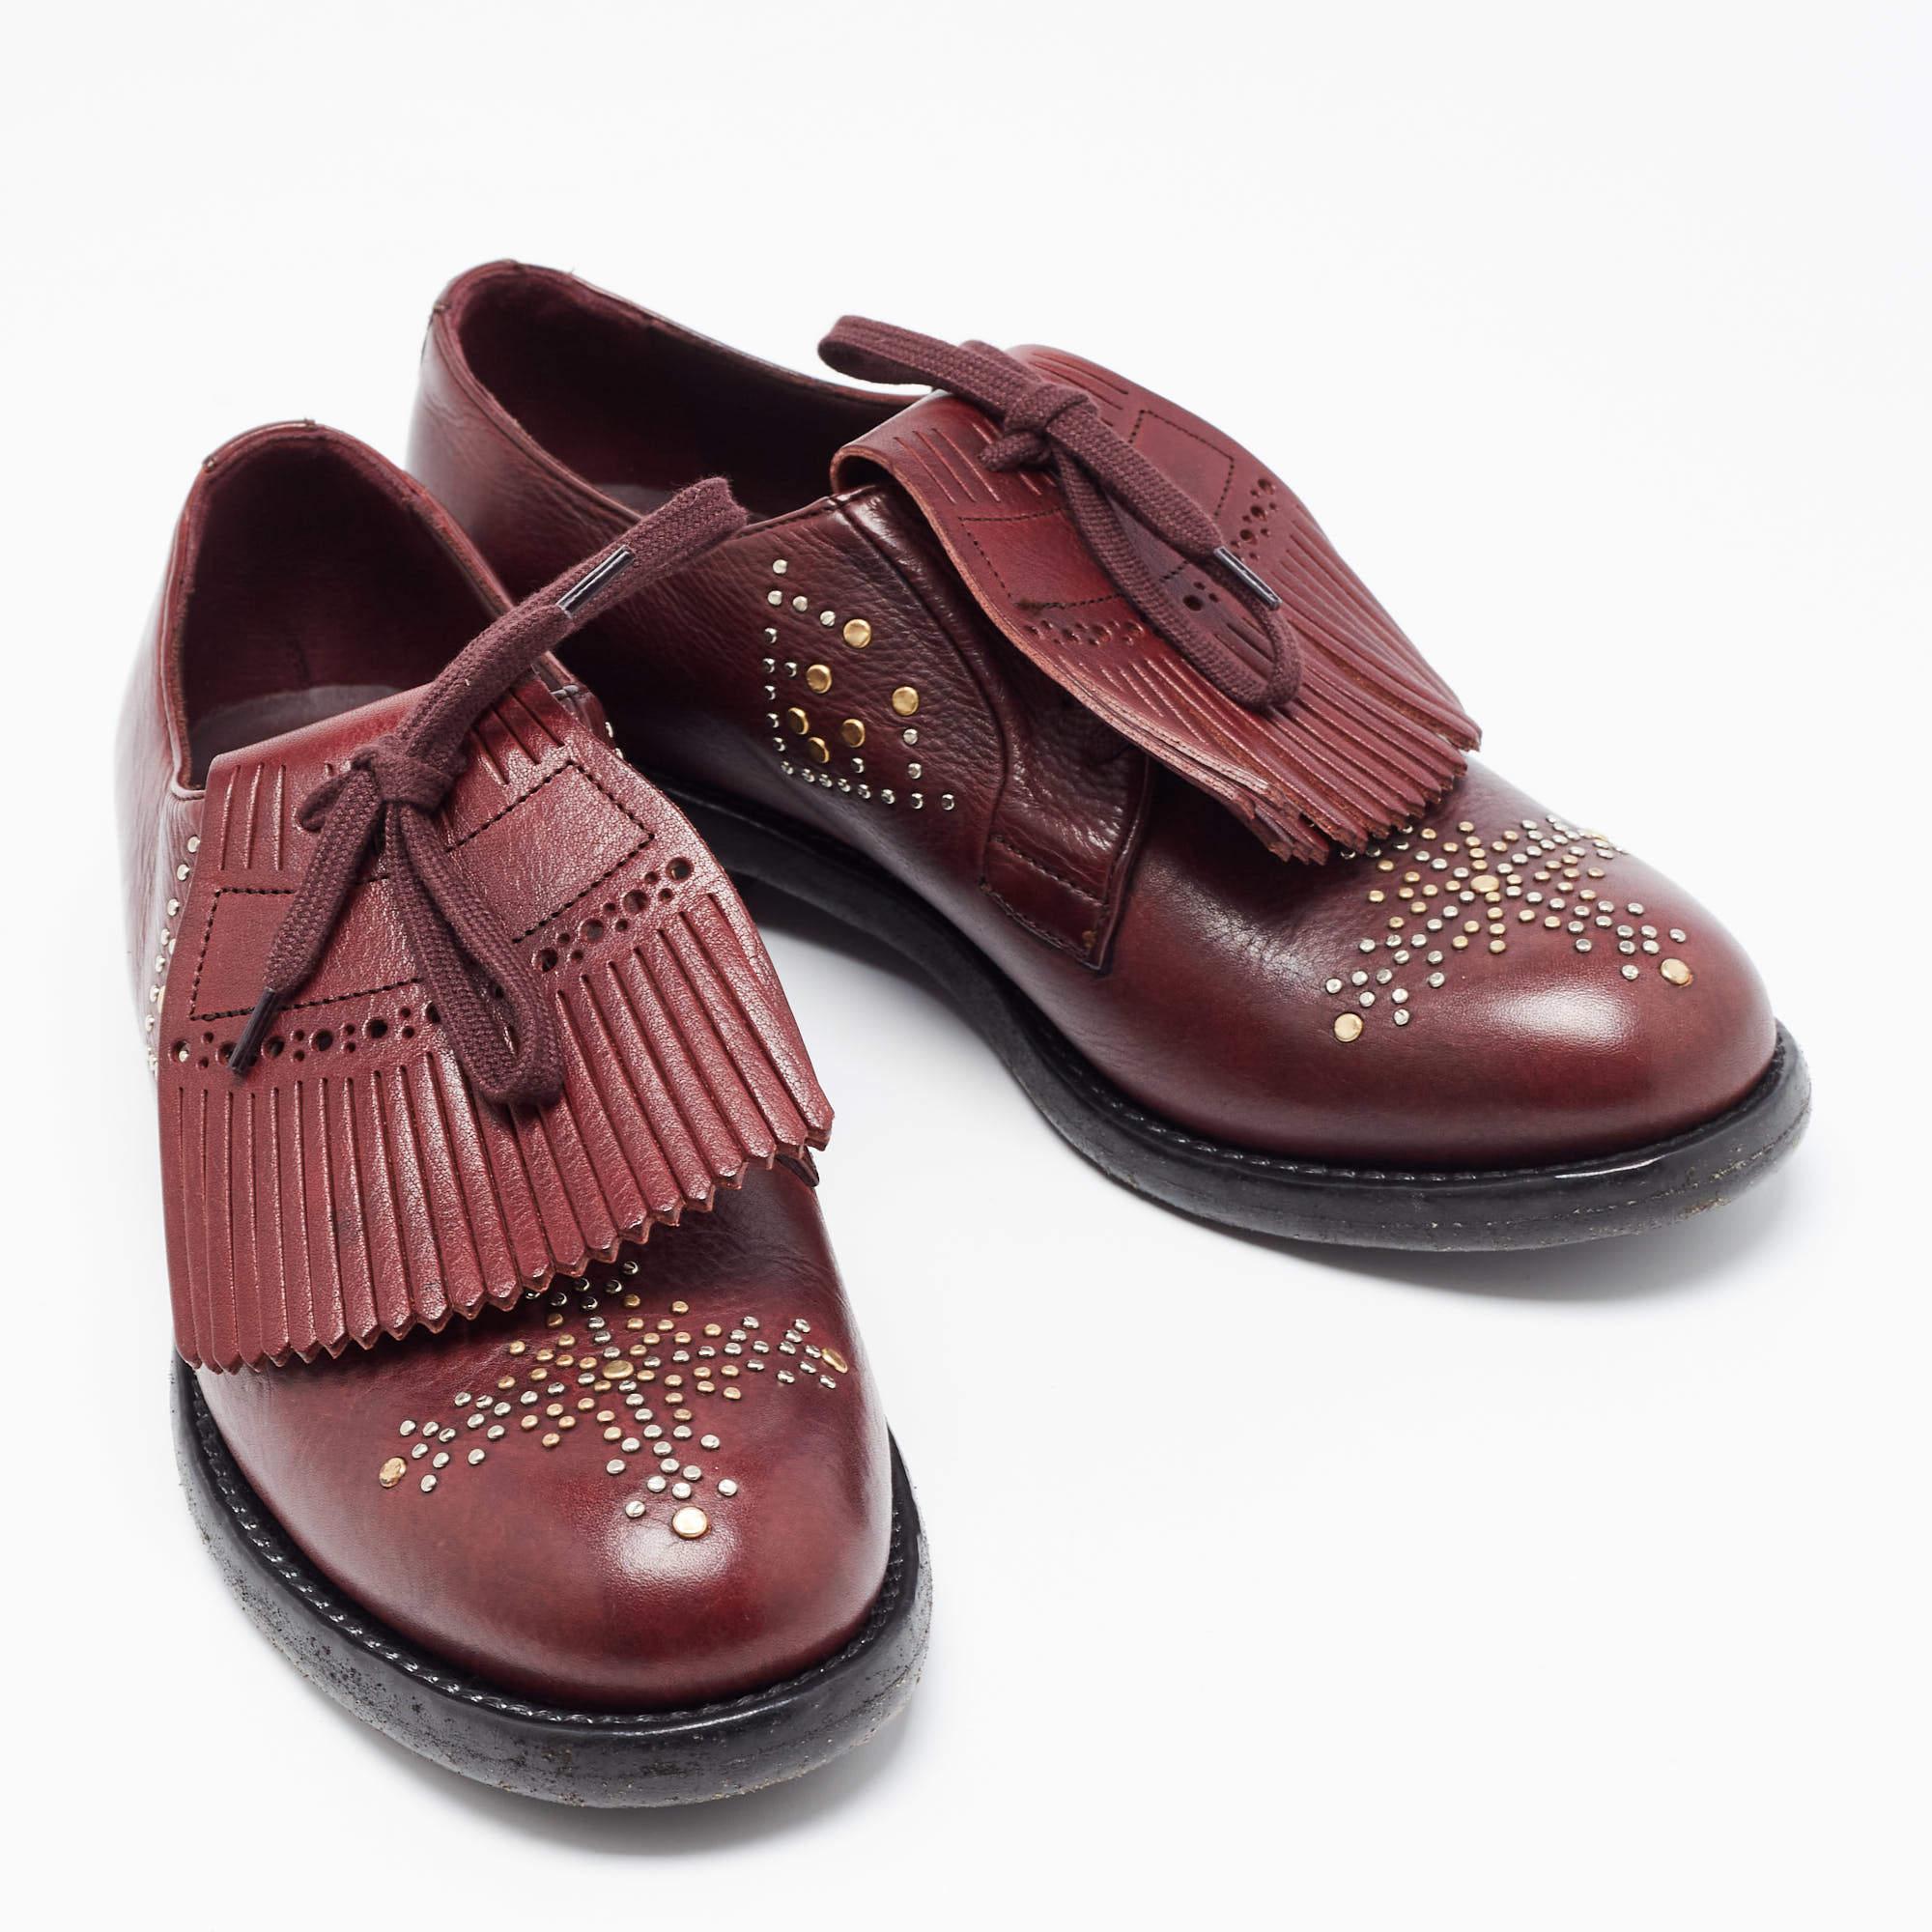 These Burberry oxfords are designed from the finest material featuring an elegant look, sturdy soles, and lace-ups on the vamps. Team these shoes with tailored pants and a blazer for a smart formal look.


Includes
Original Box